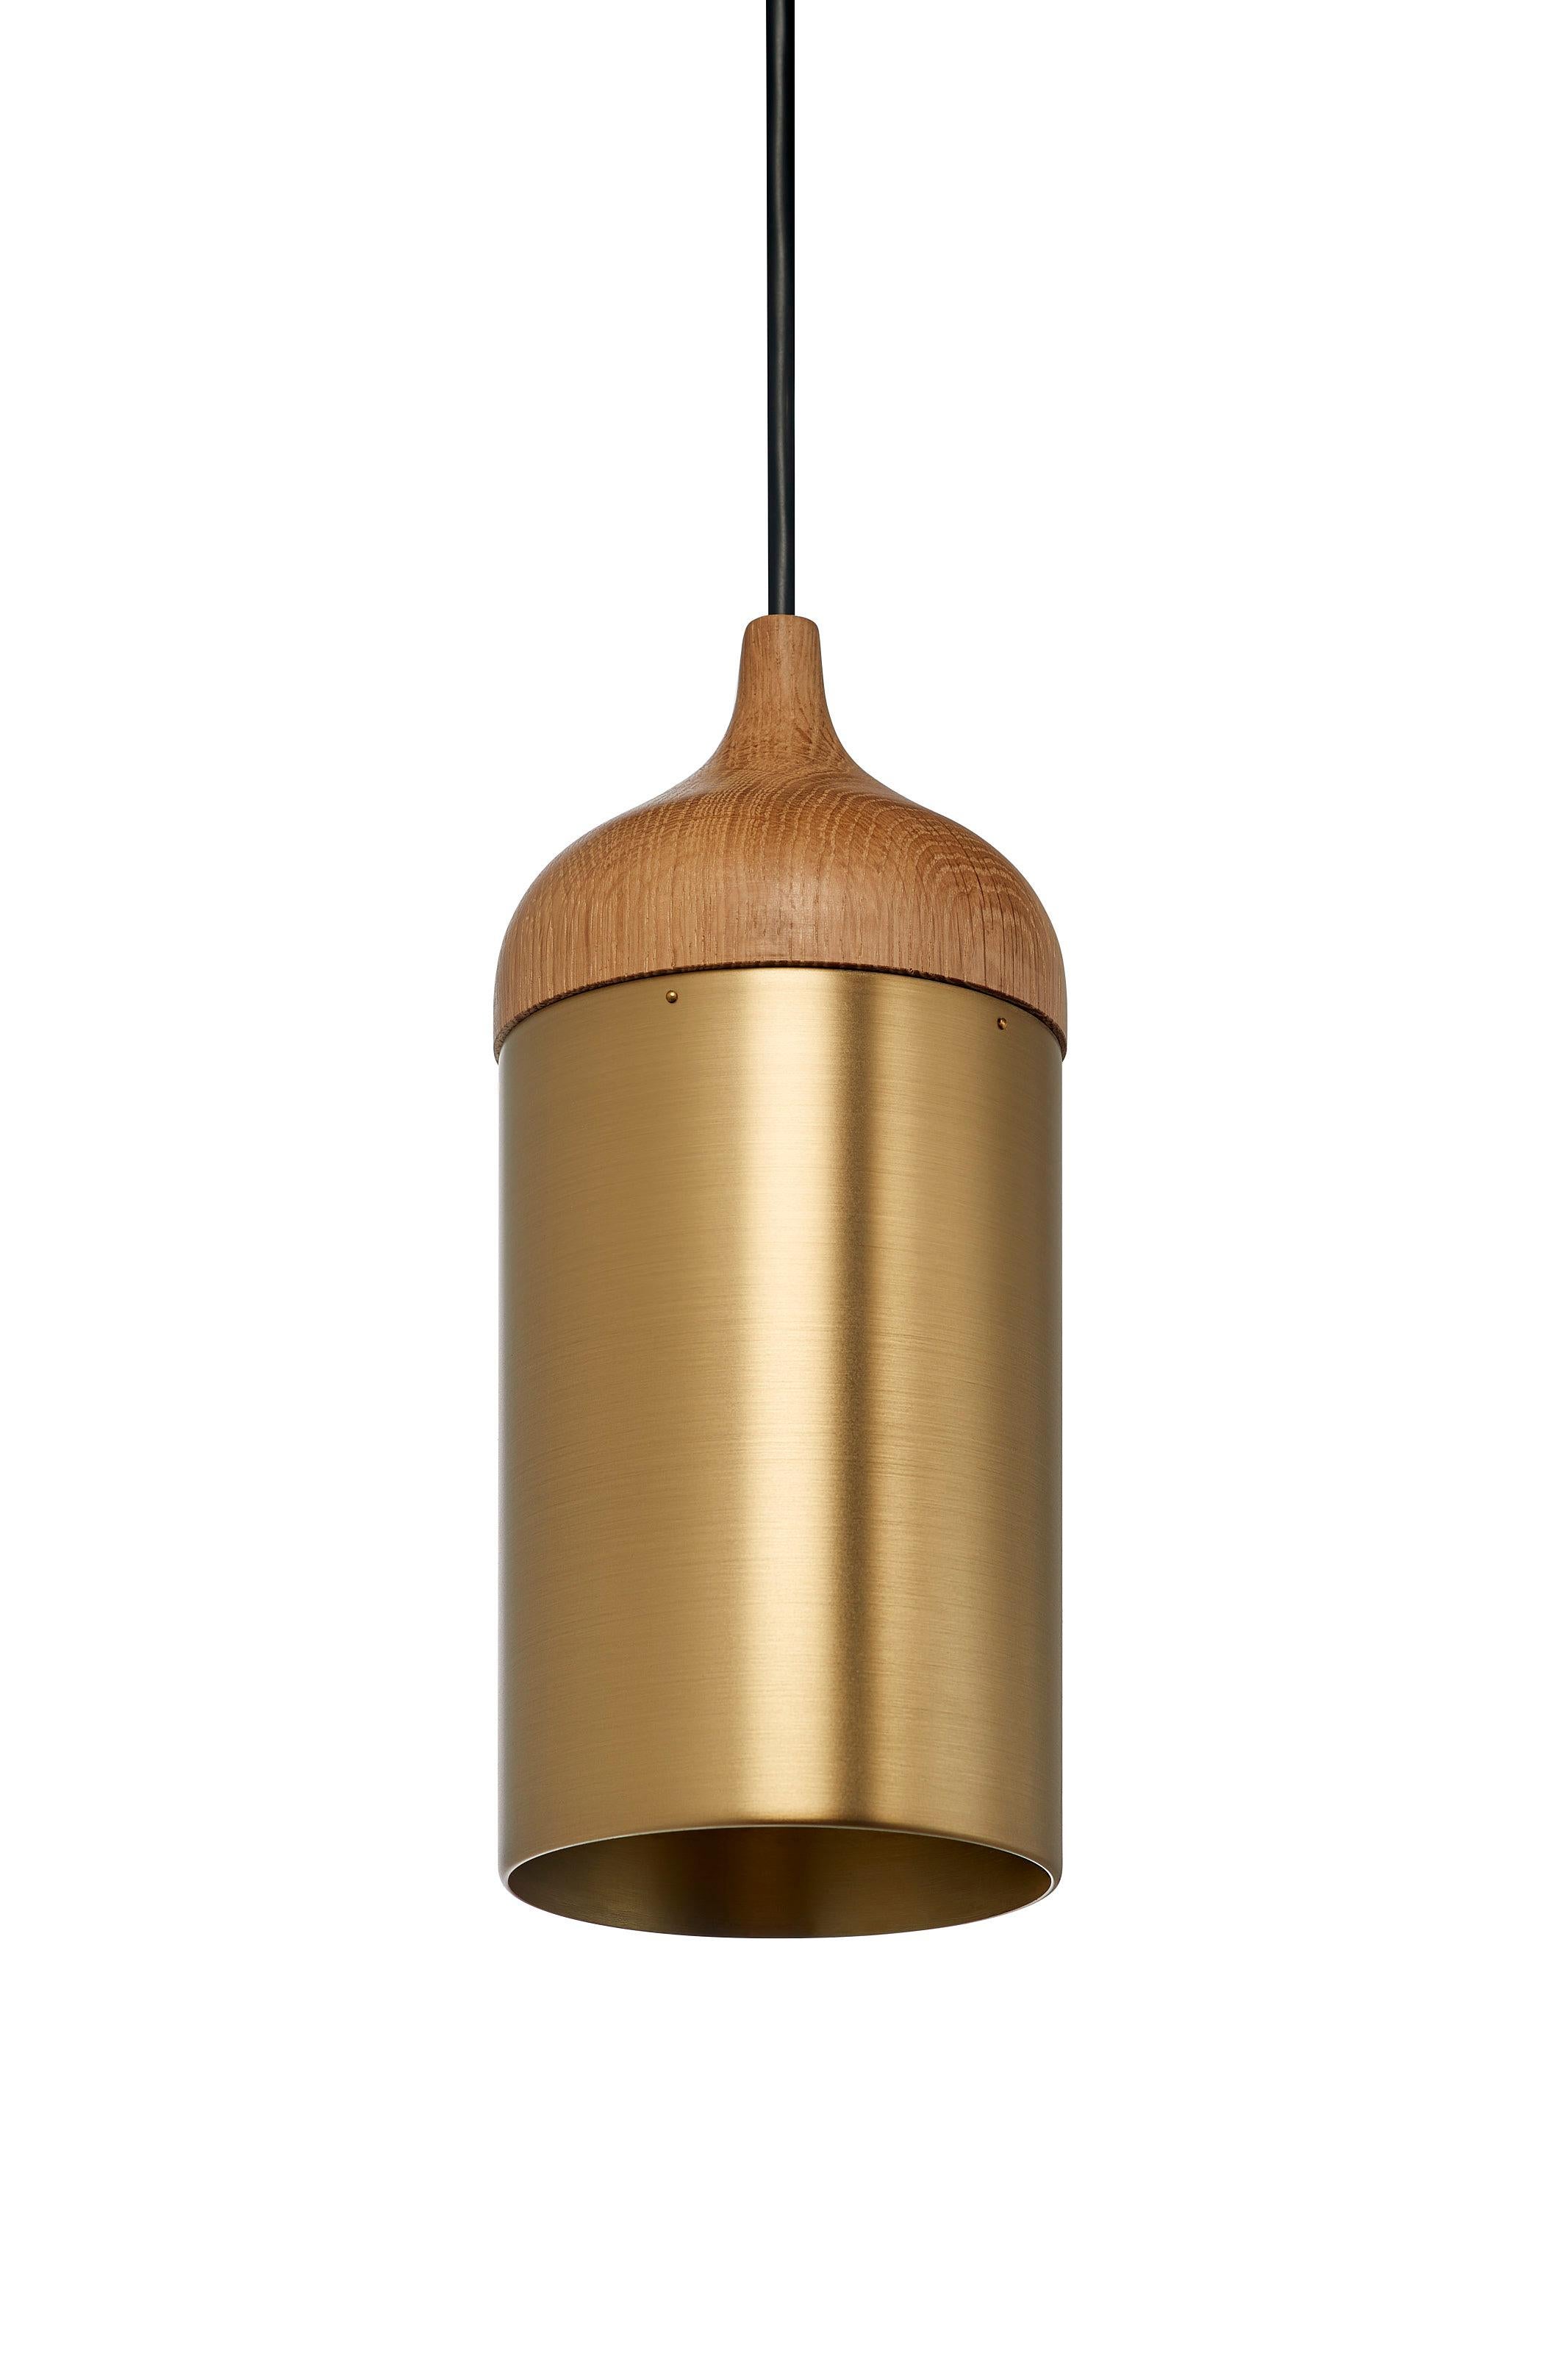 Our well known copper lamp is also available in 2mm thick solid brass. The parts are shaped on the same type of machine, the lathe. Brass lamp is available with three different wood types. 

Brushed solid brass - lacquered
Natural American walnut